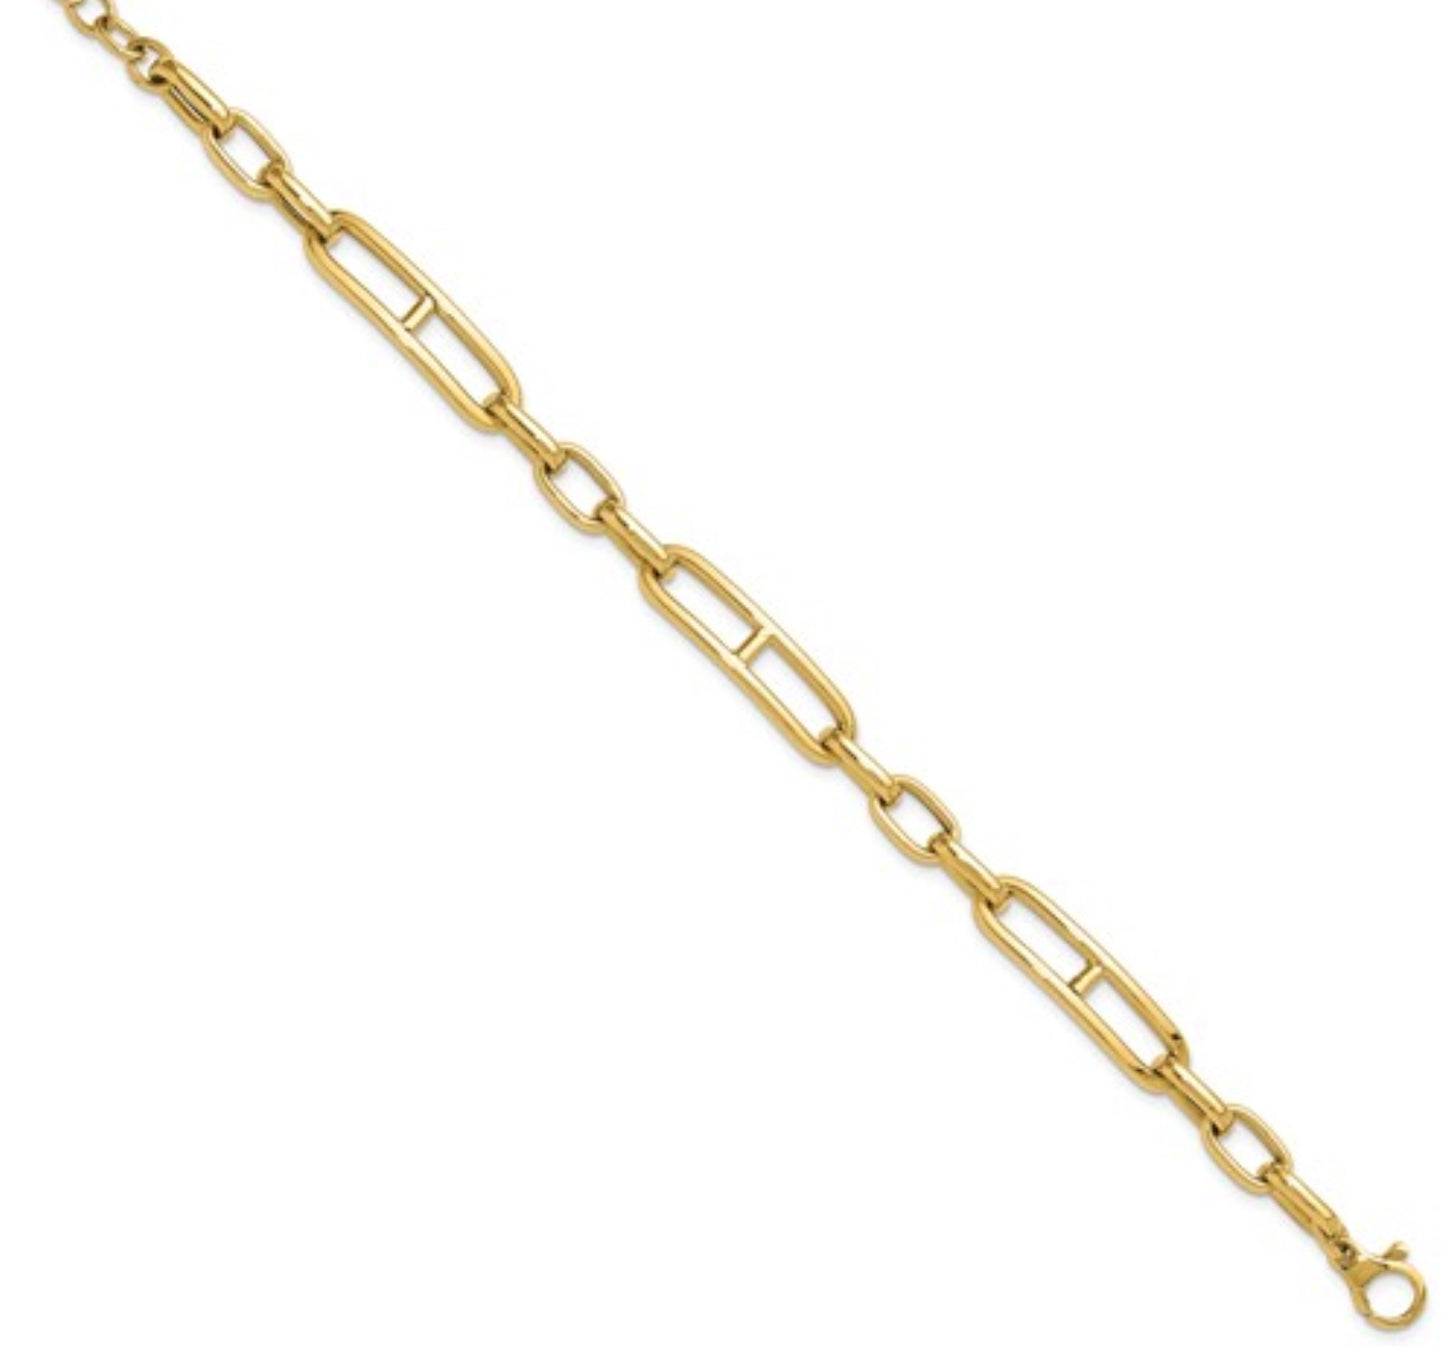 14k Yellow Gold Extra Large Paperclip Bracelet